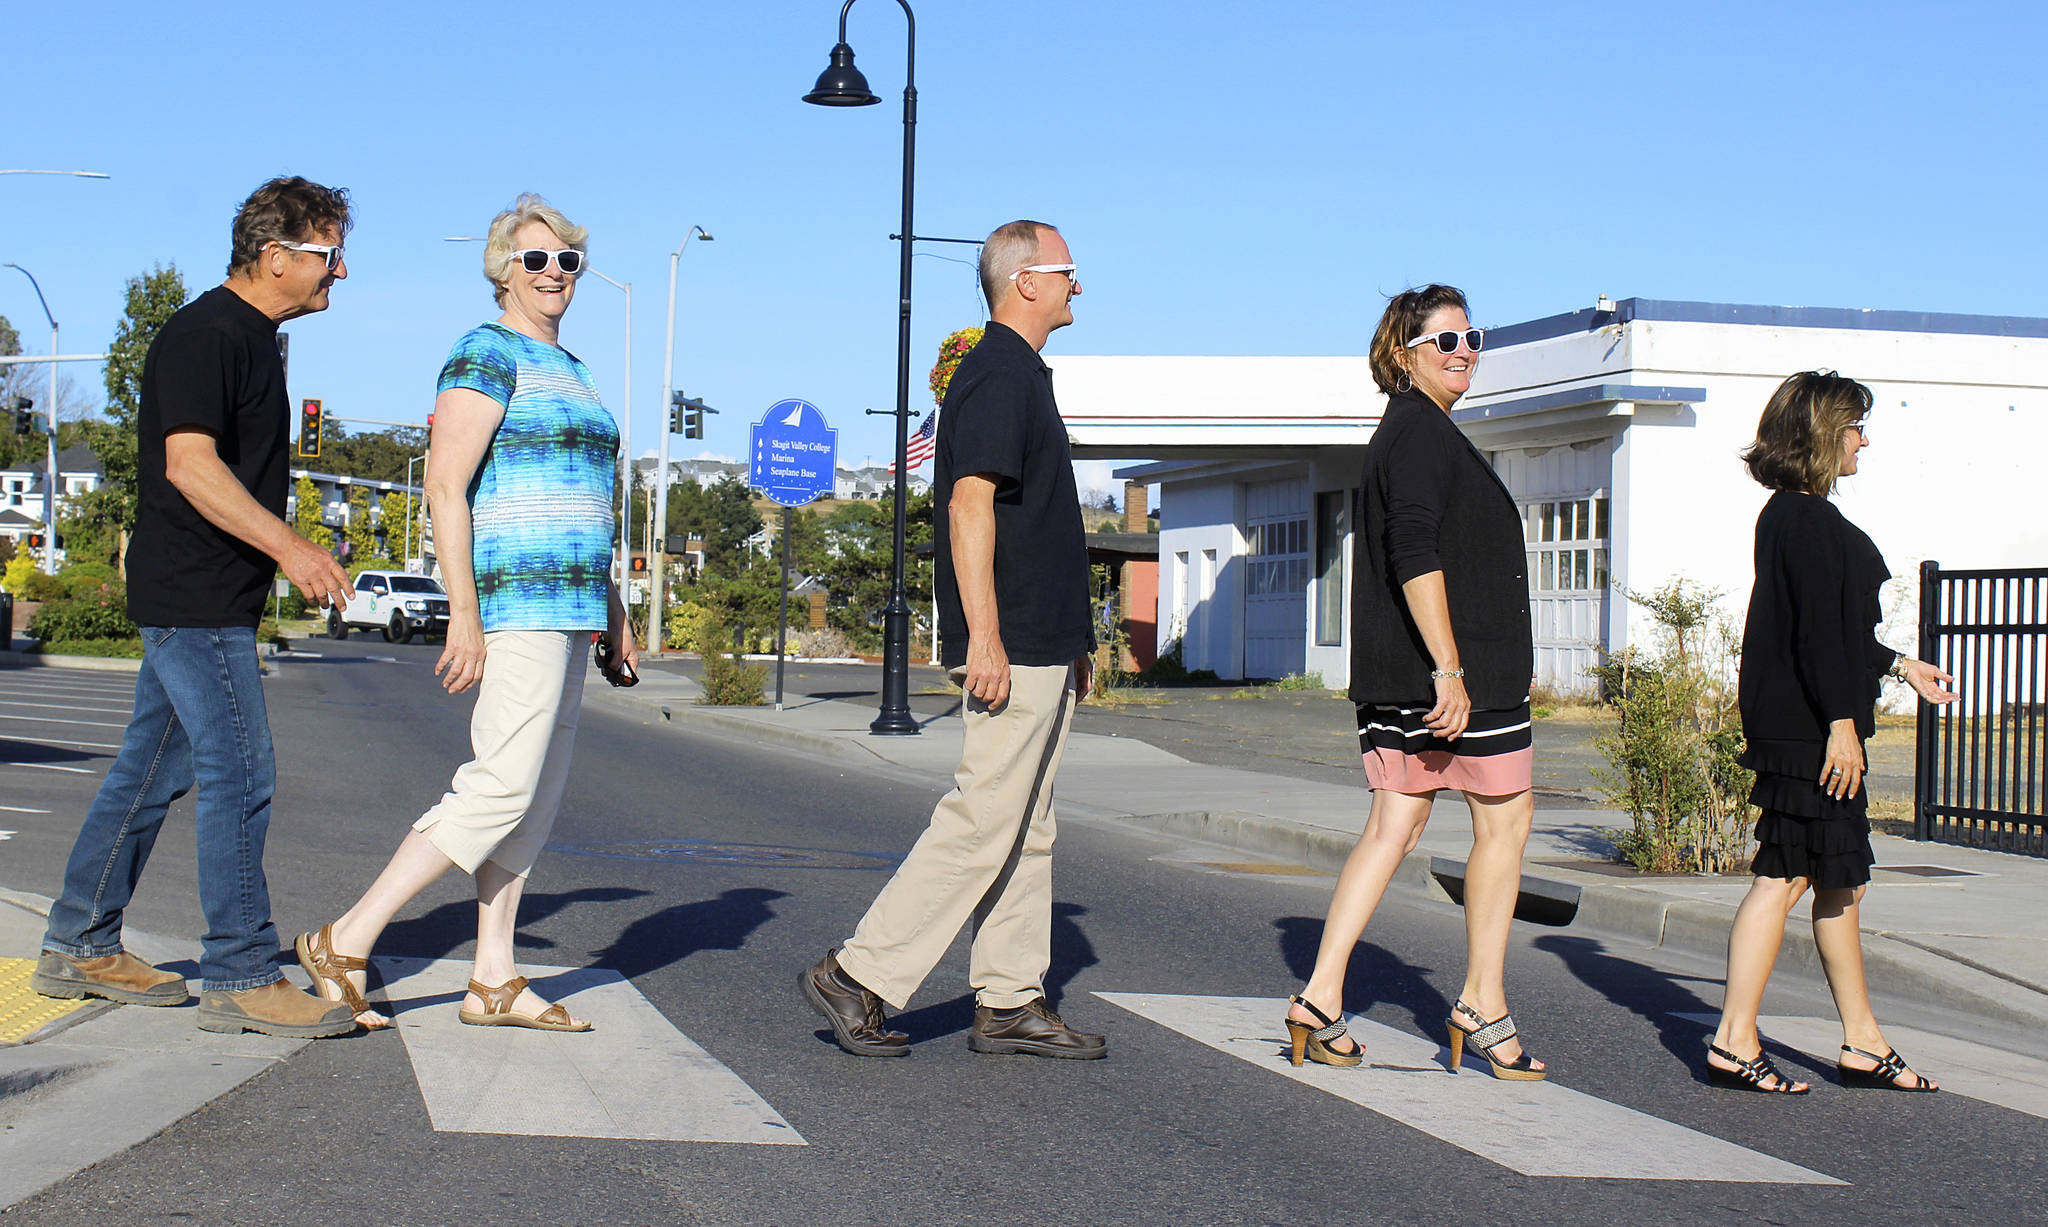 Photo by Patricia Guthrie/Whidbey News-Times                                An impromptu meeting of some Oak Harbor Music Festival board members results in a recreation of the iconic Beatles Abbey Road album cover. Walking across Pioneer Way are, from left, Larry Mason, Margaret Livermore, Gary Jandzinski, Cynthia Mason and Cheryl Jandzinski.